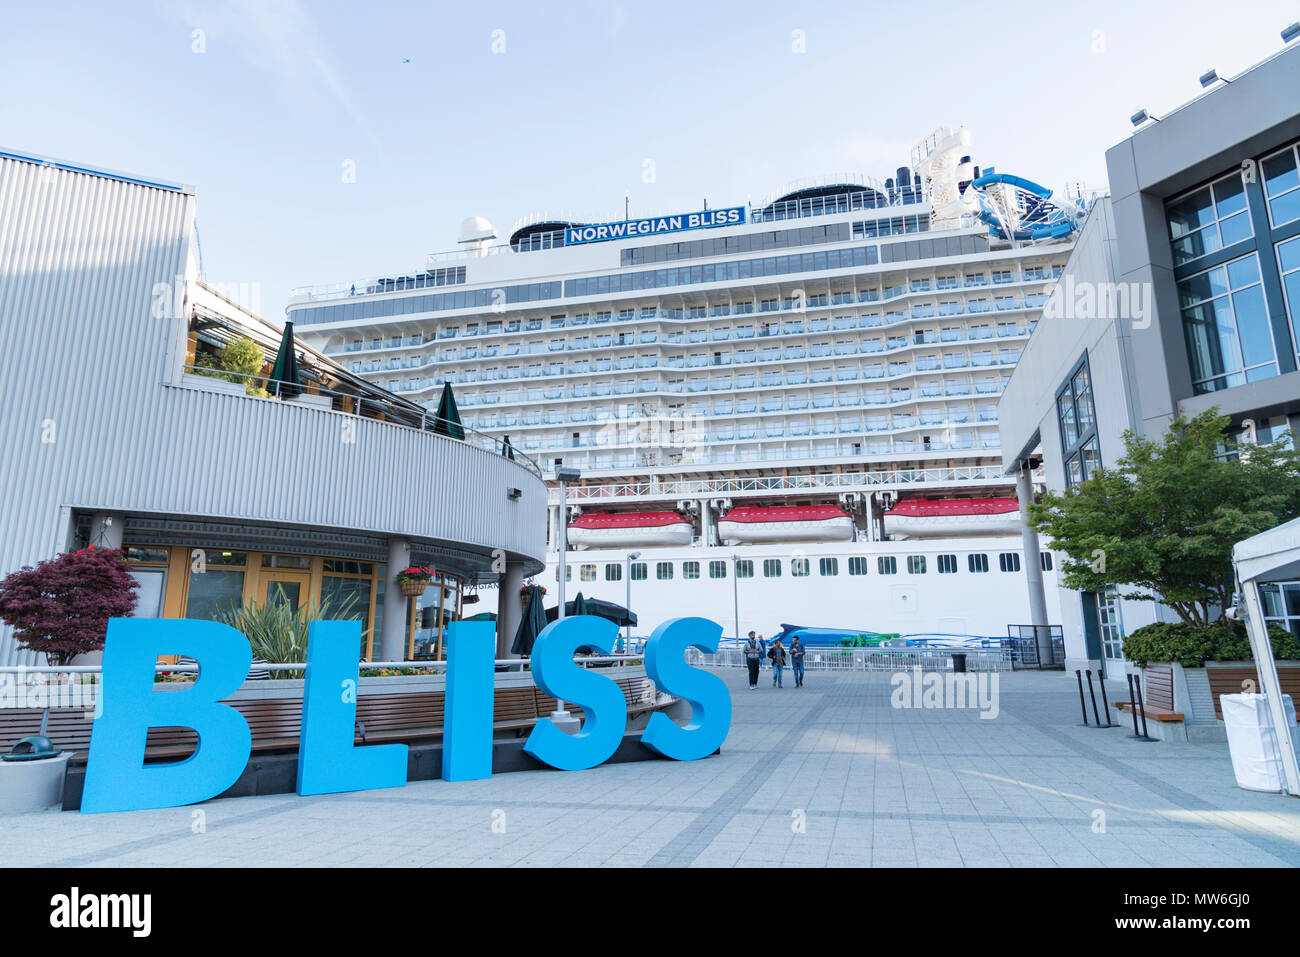 Norwegian Cruise Line ship Bliss docked at sunset in Seattle Washington christening ceremony with large sign of ships name. Stock Photo